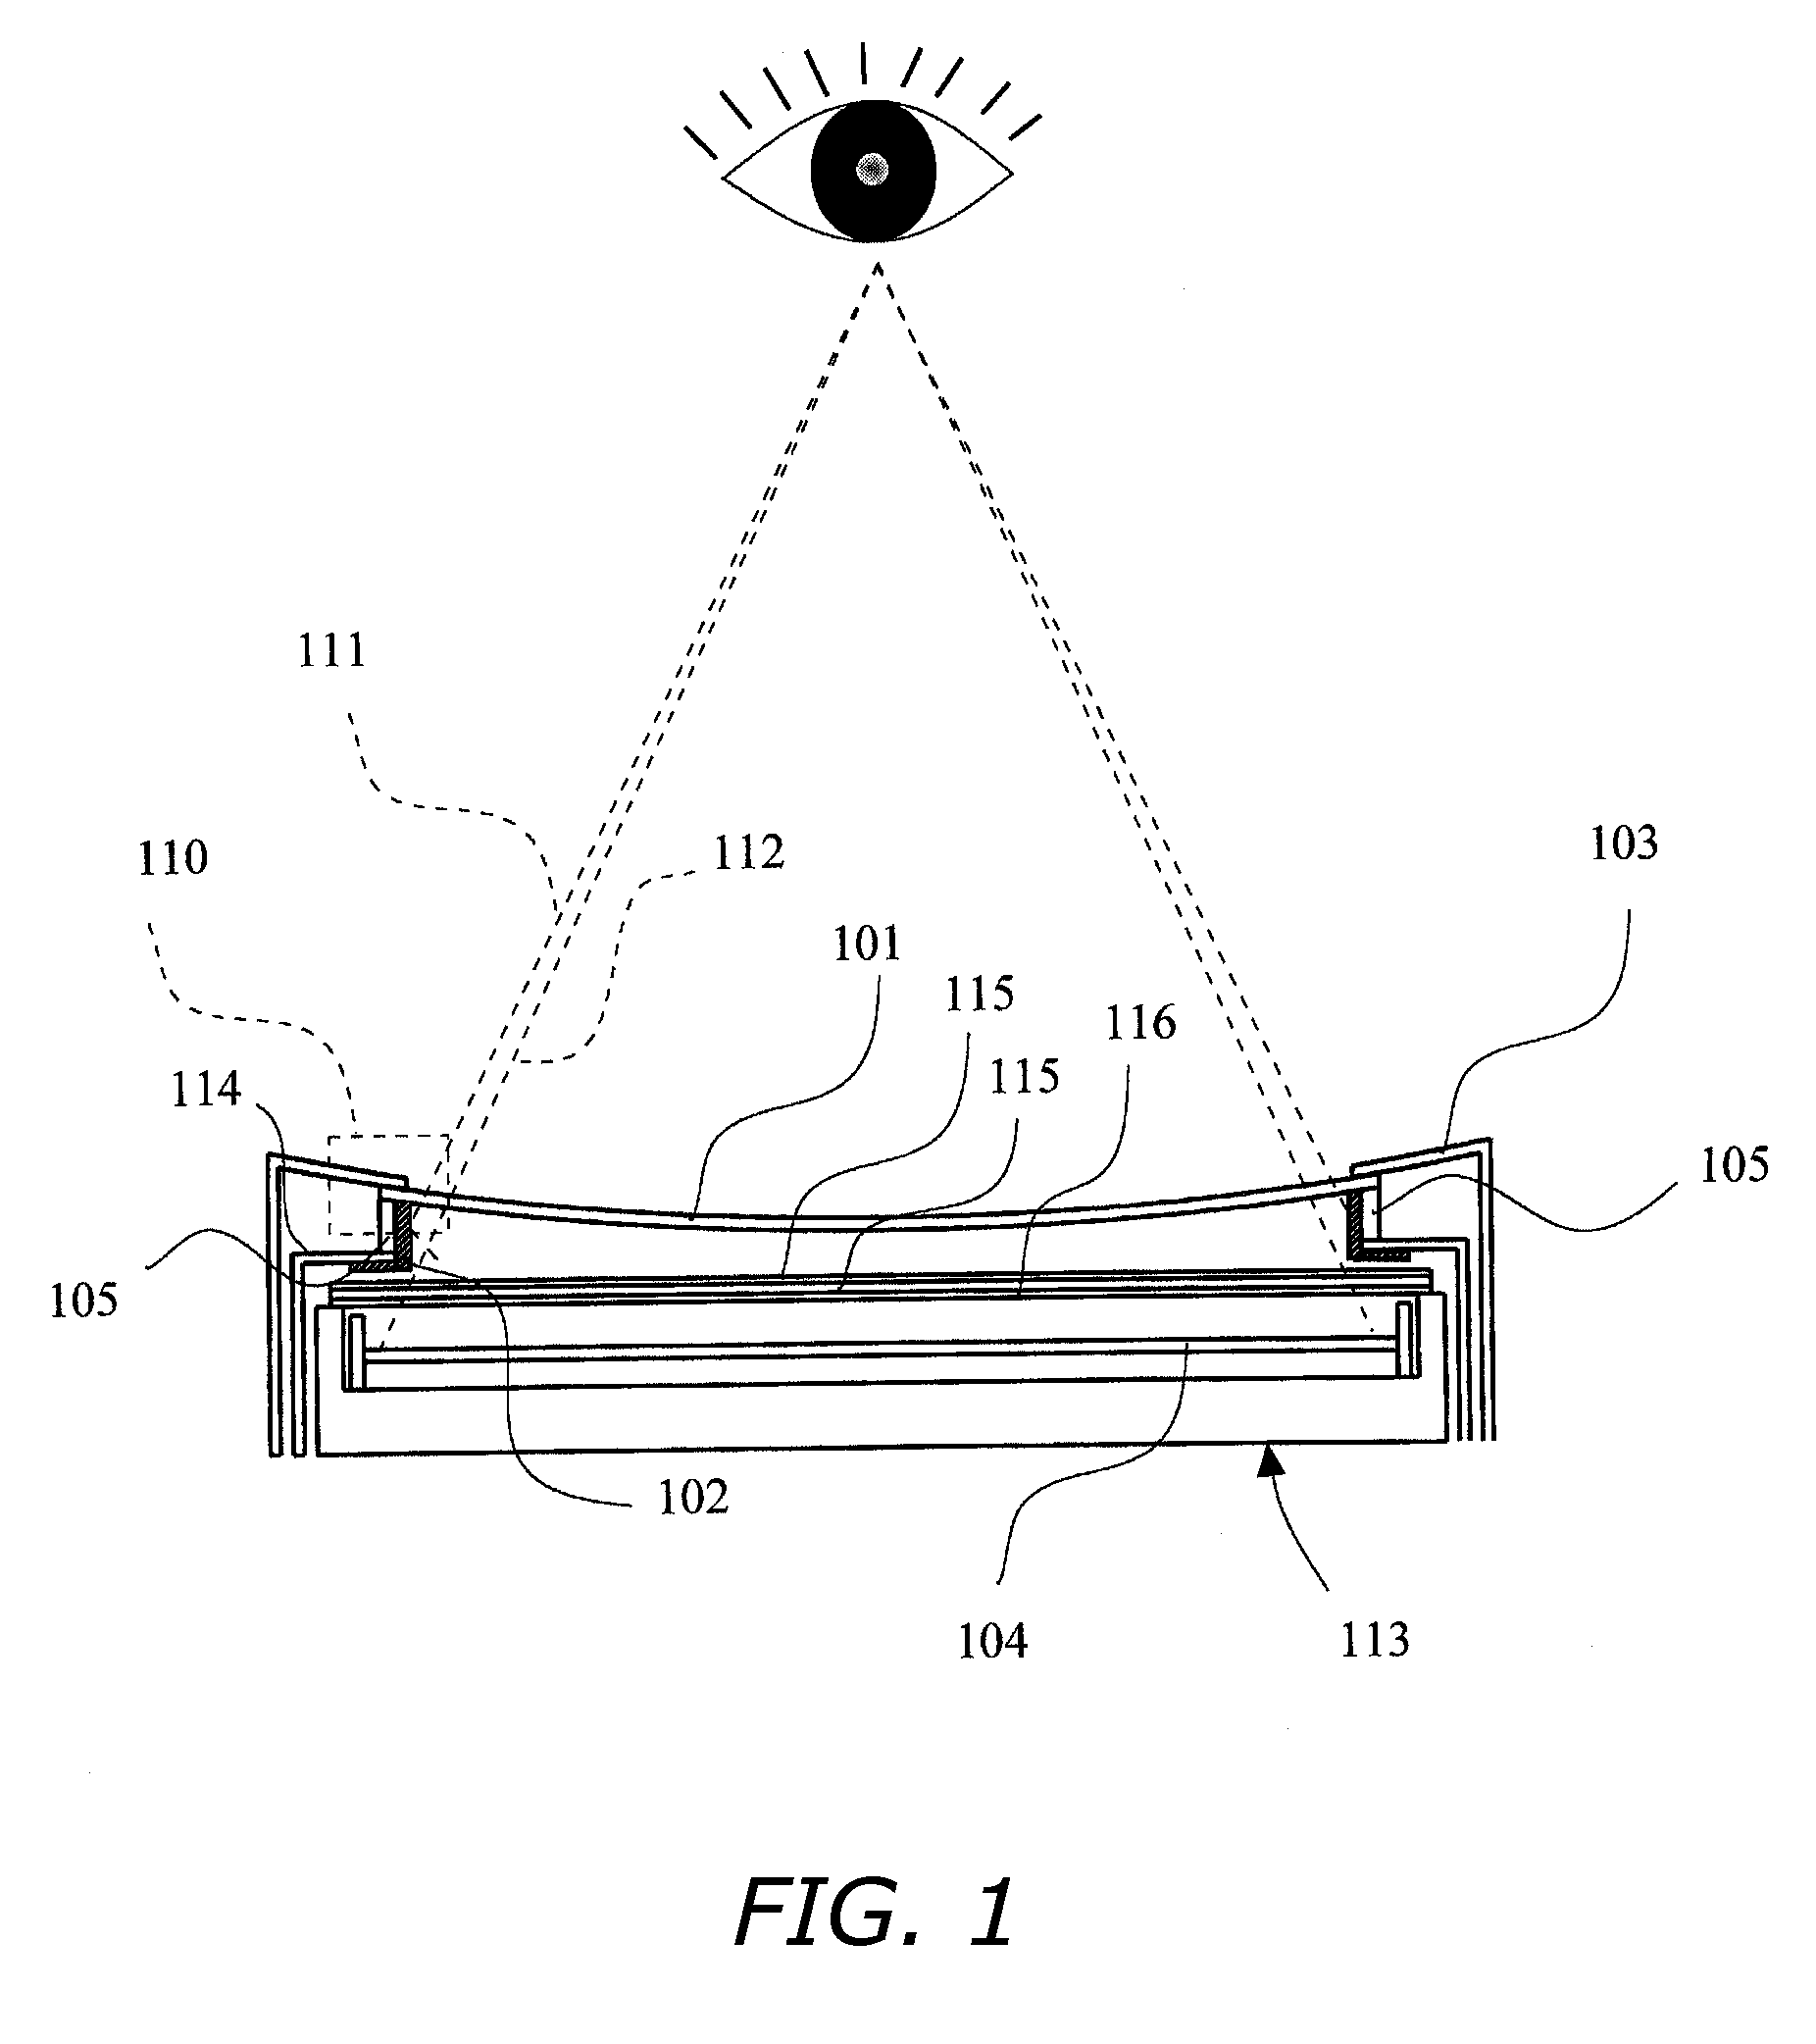 Curved liquid-crystal display device, and method for the forming and installation of reflective plate/sheet for curved liquid-crystal display device